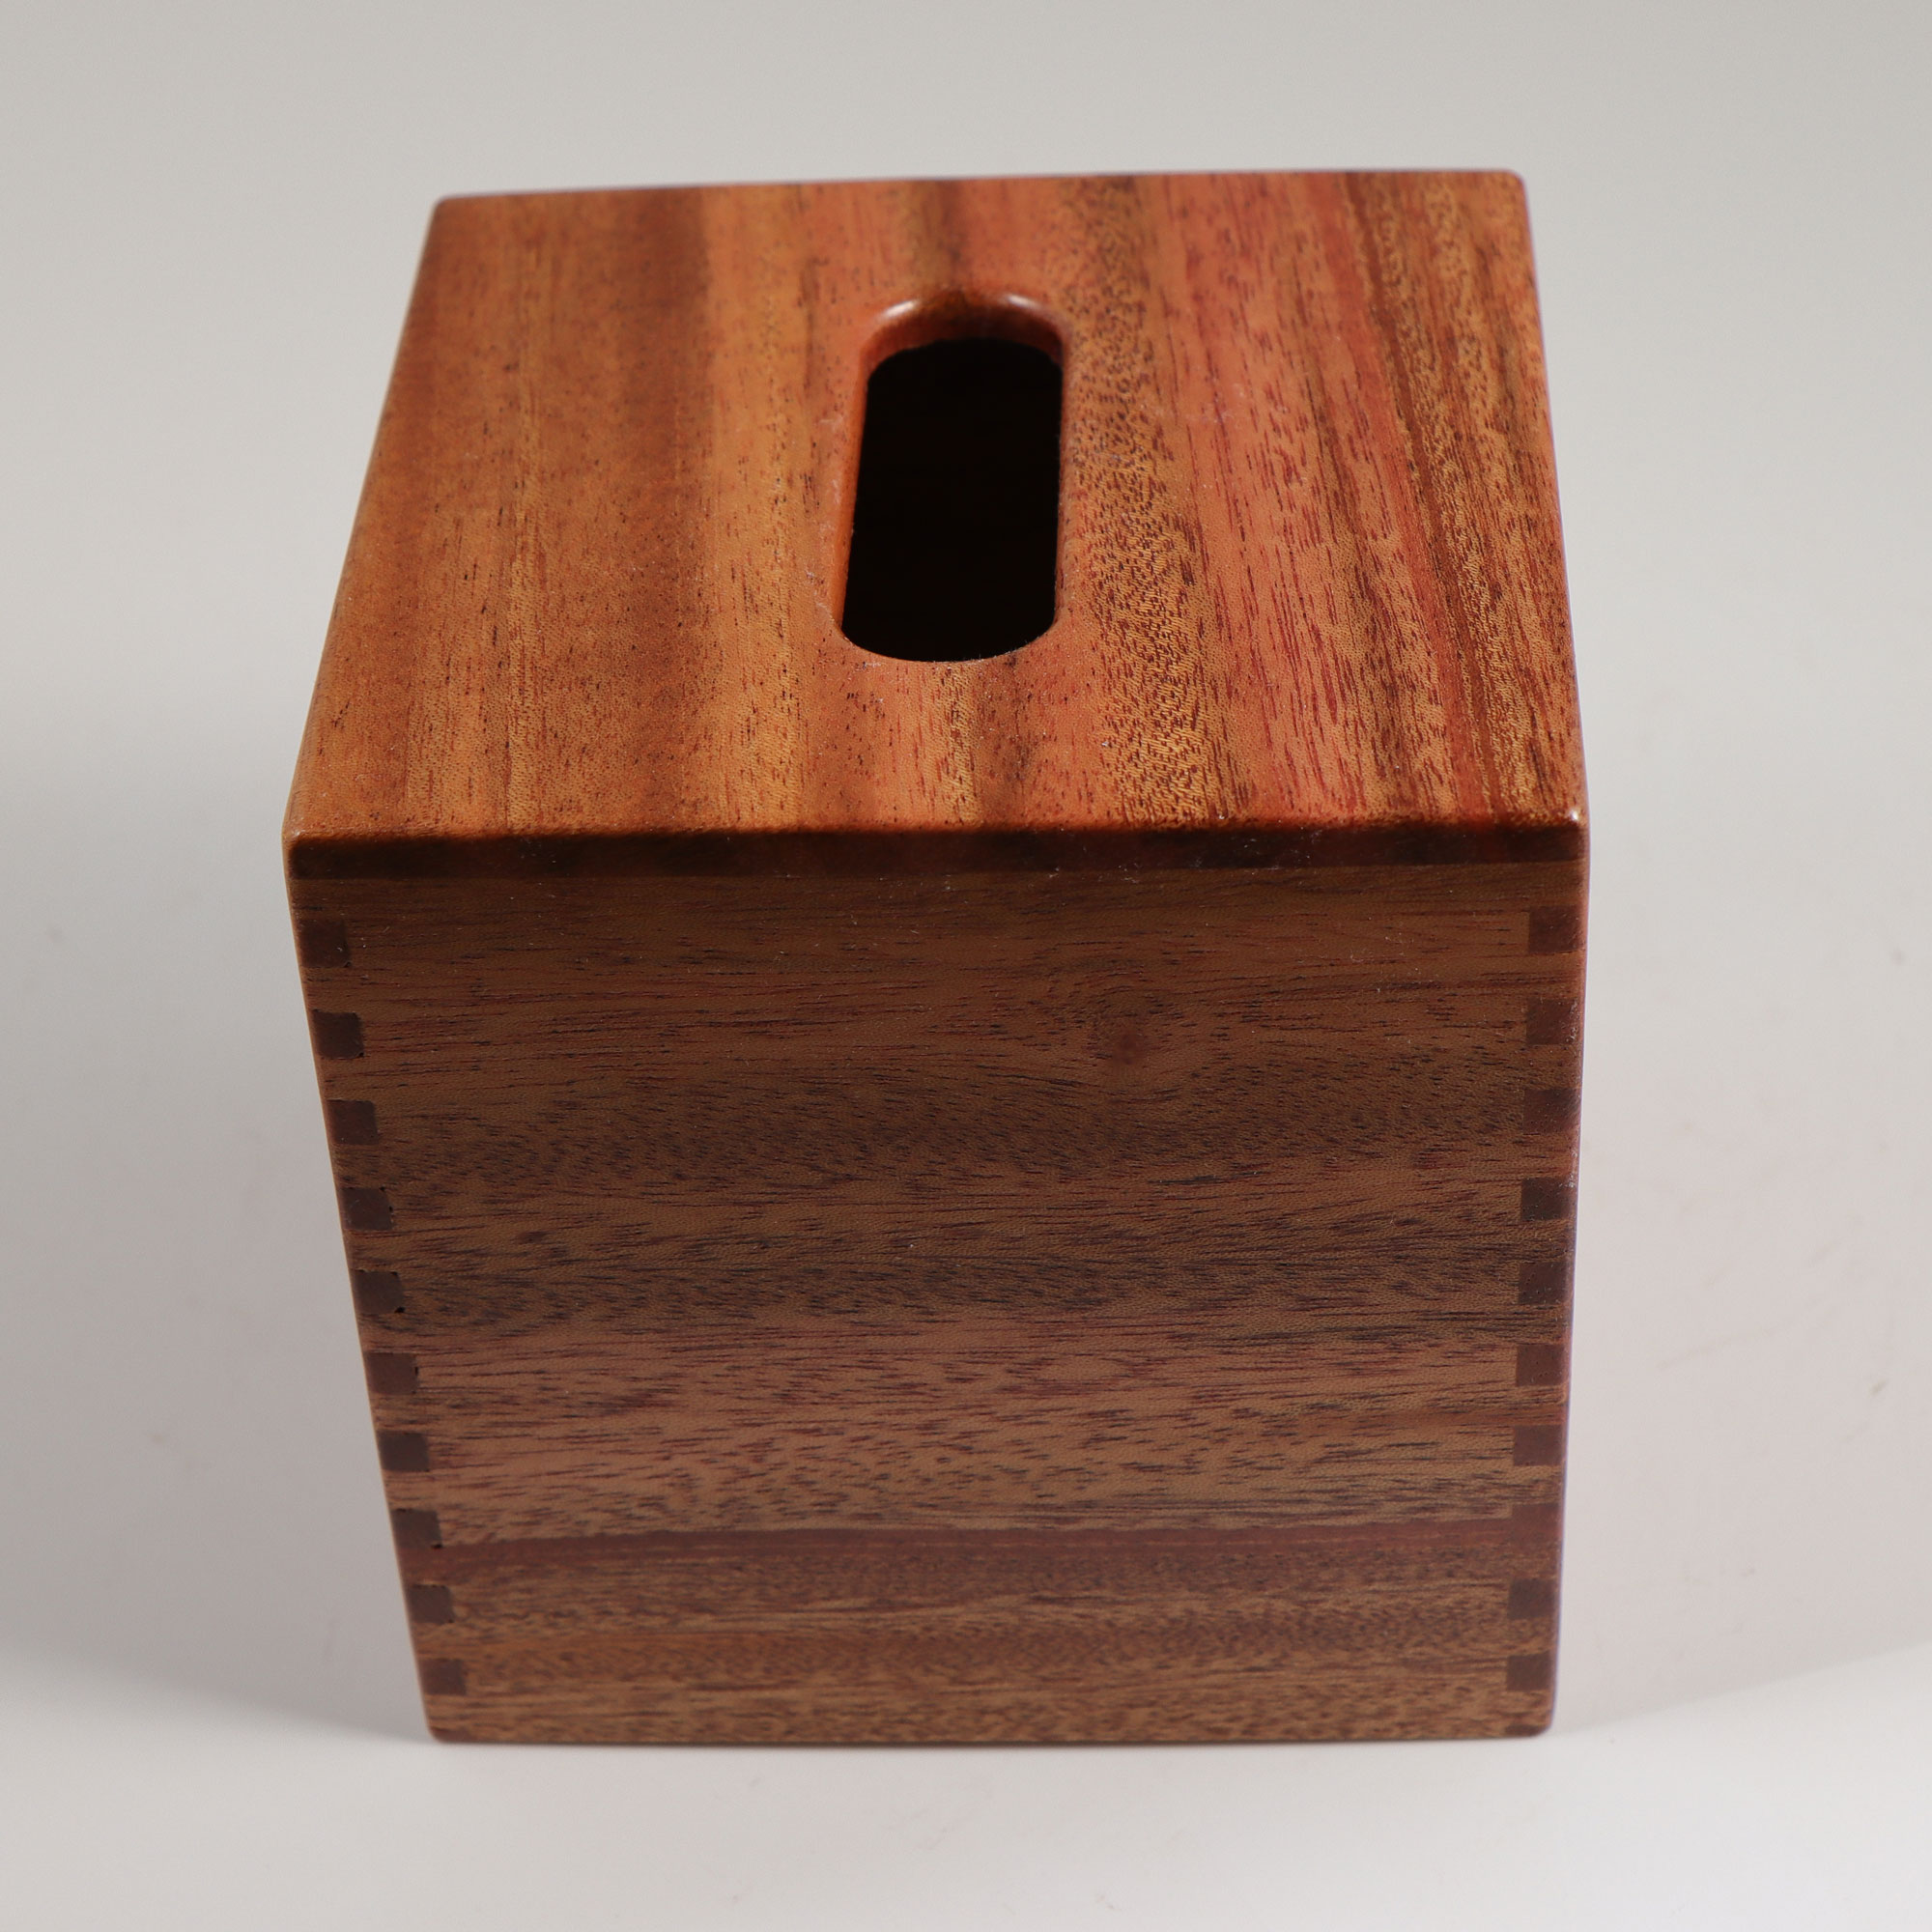 Solid Cherry Handmade Tissue Box Cover Holder - Boutique Square Cube Style  - Box Jointed Sides